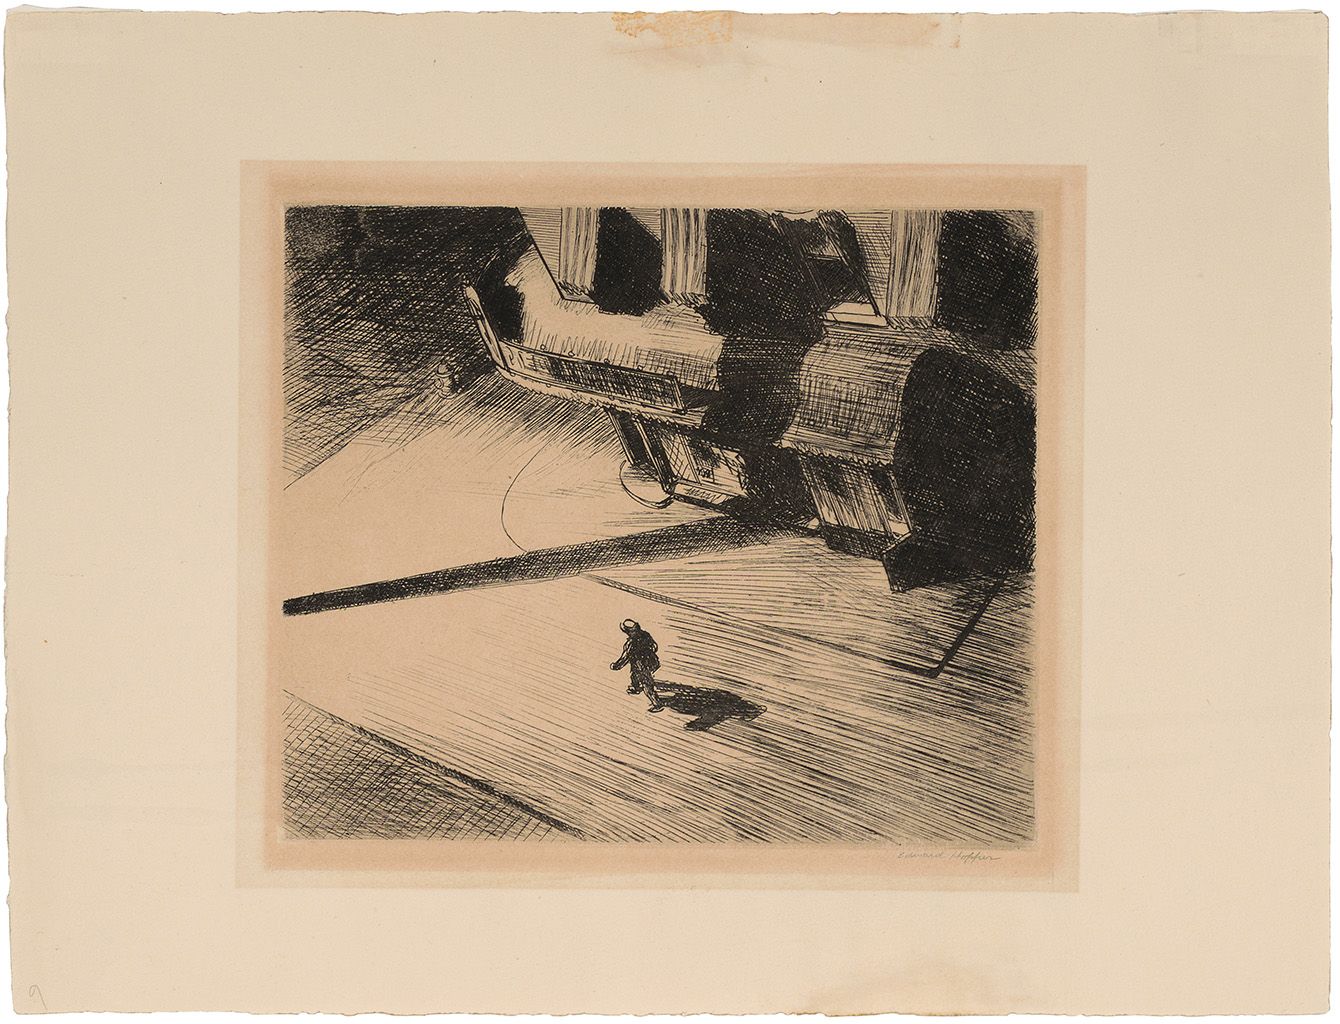 The reverse mat burn on this Edward Hopper etching is a common condition issue for framed prints.